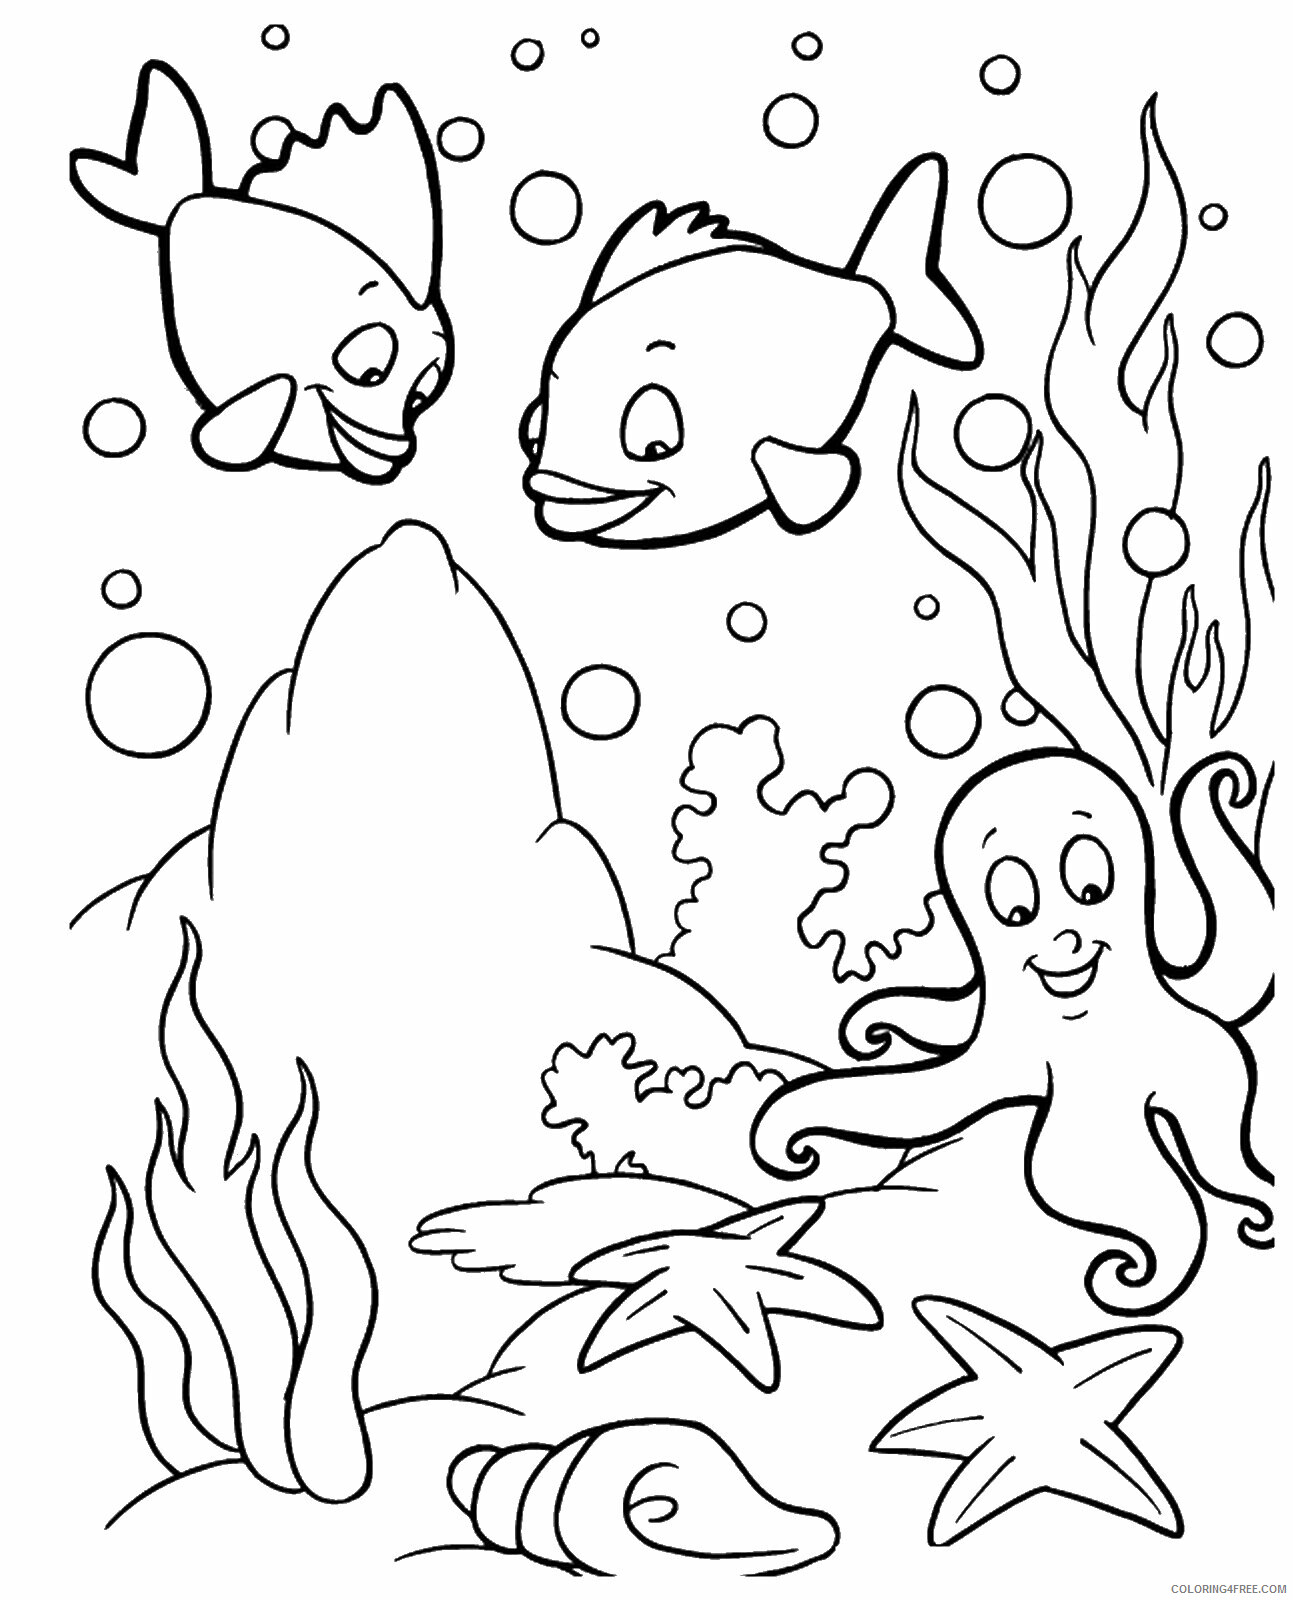 Starfish Coloring Pages Animal Printable Sheets starfish_cl_04 2021 4699 Coloring4free